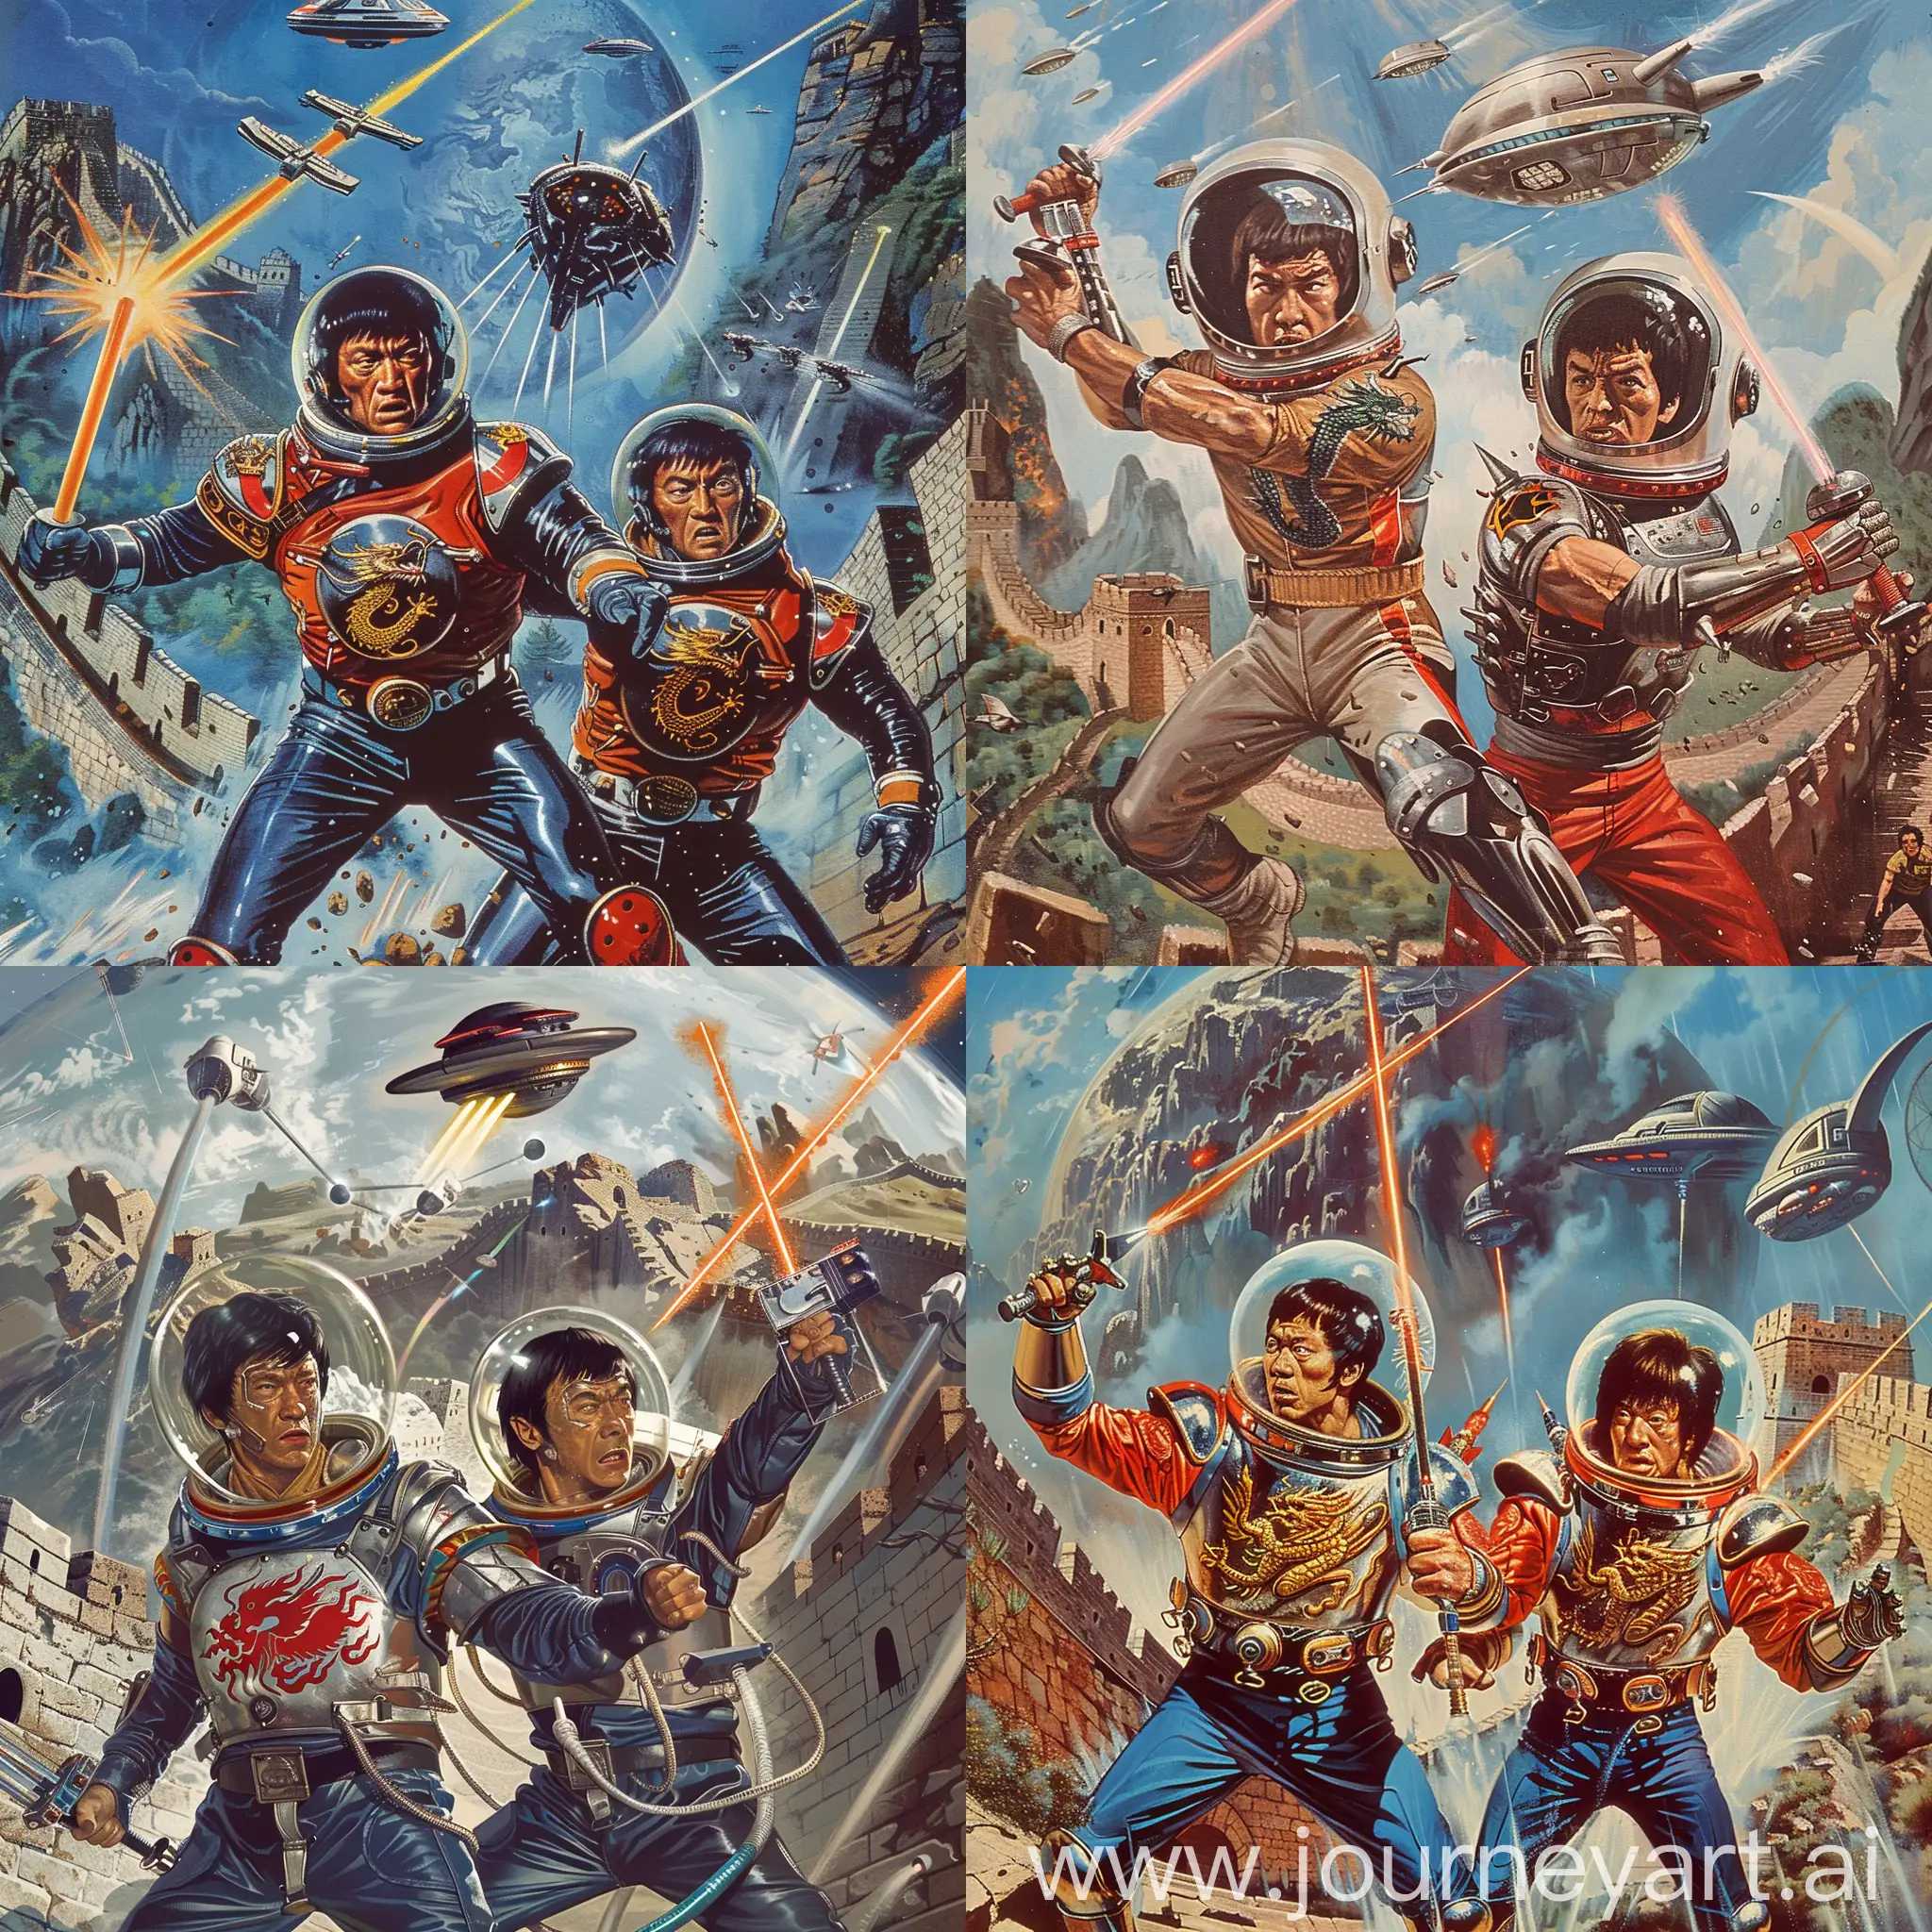 Epic-Battle-of-Astronaut-Martial-Artists-Against-Aliens-on-the-Great-Wall